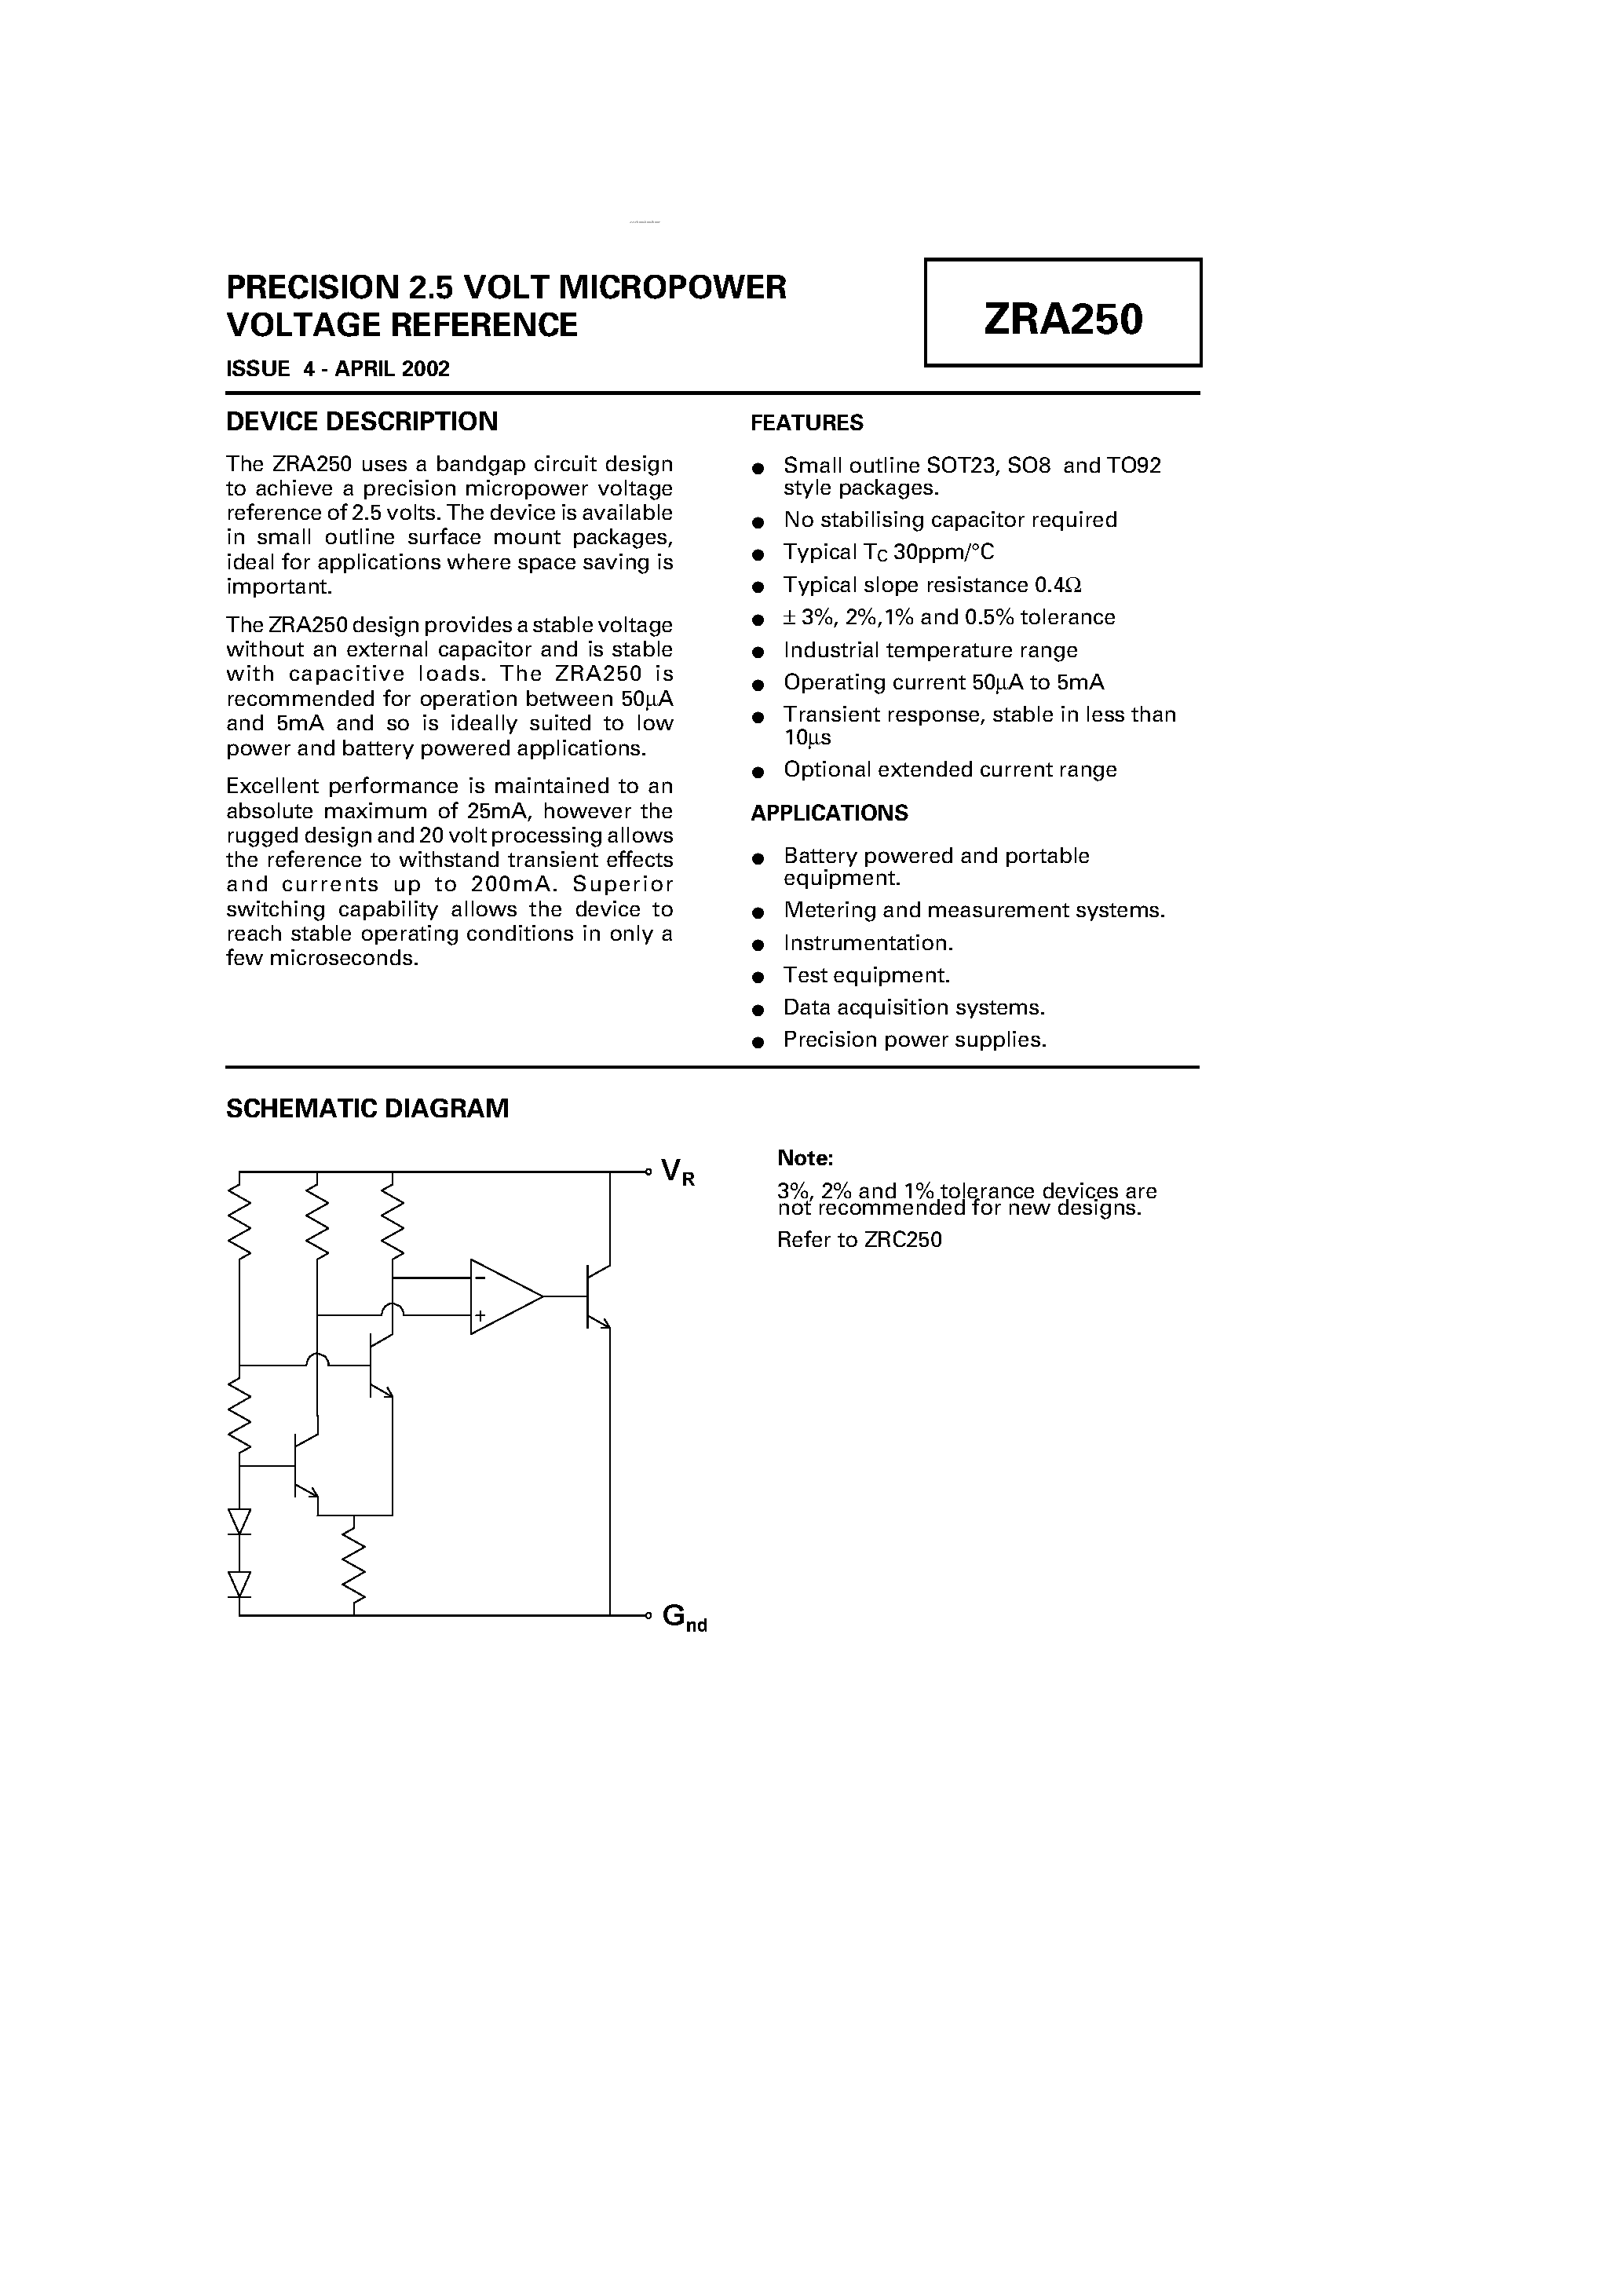 Datasheet ZRA250 - PRECISION 2.5 VOLT MICROPOWER VOLTAGE REFERENCE page 1